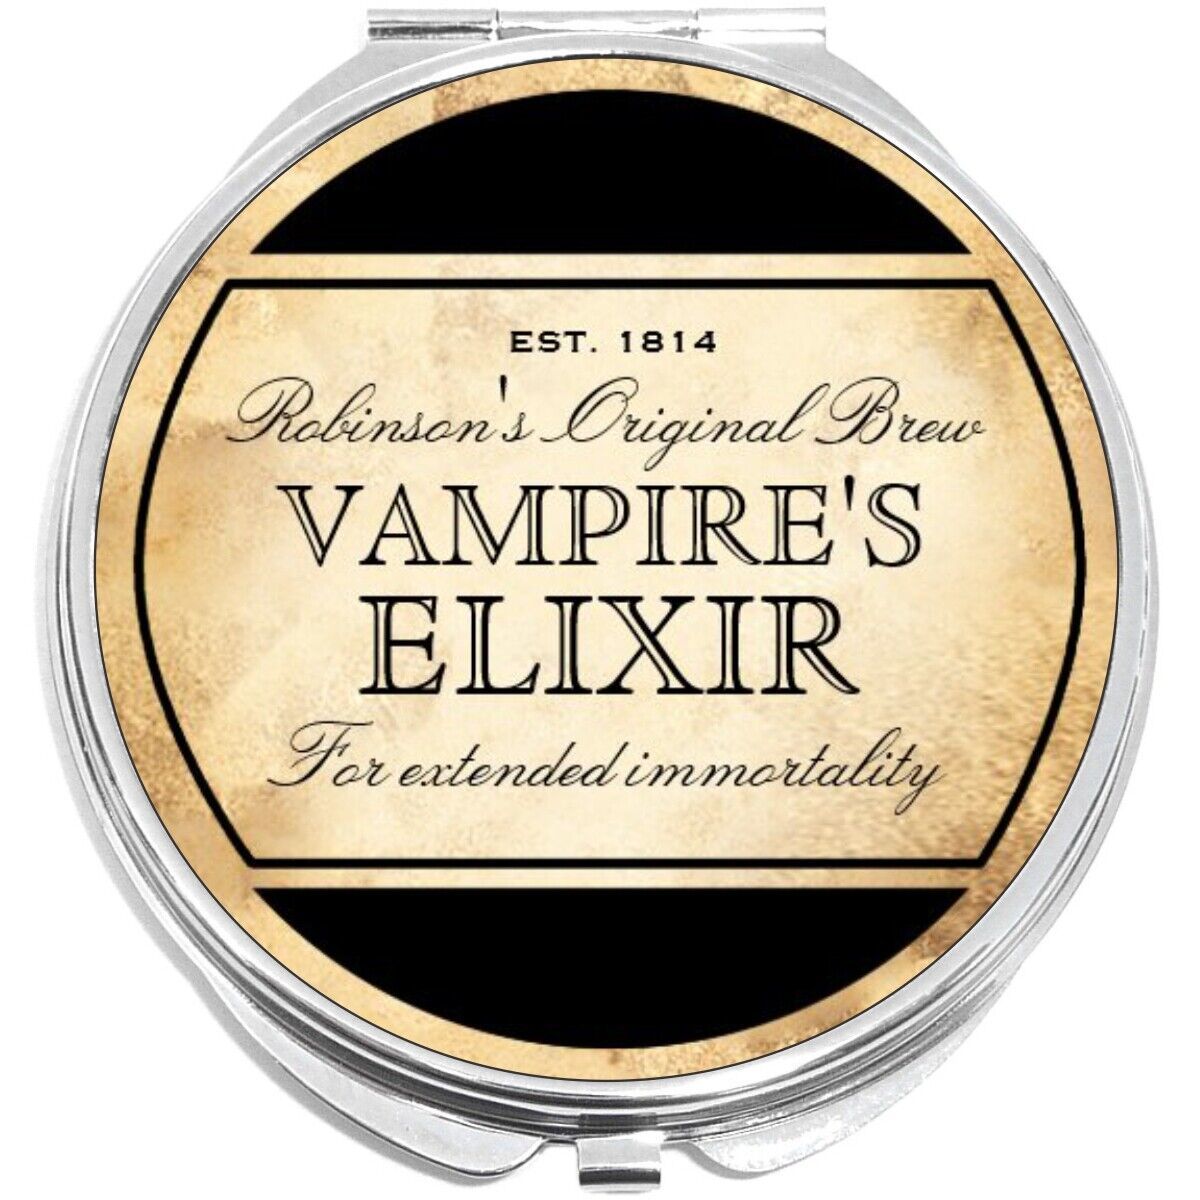 Vampire Elixir Vintage Design Compact with Mirrors - for Pocket or Purse - $11.76